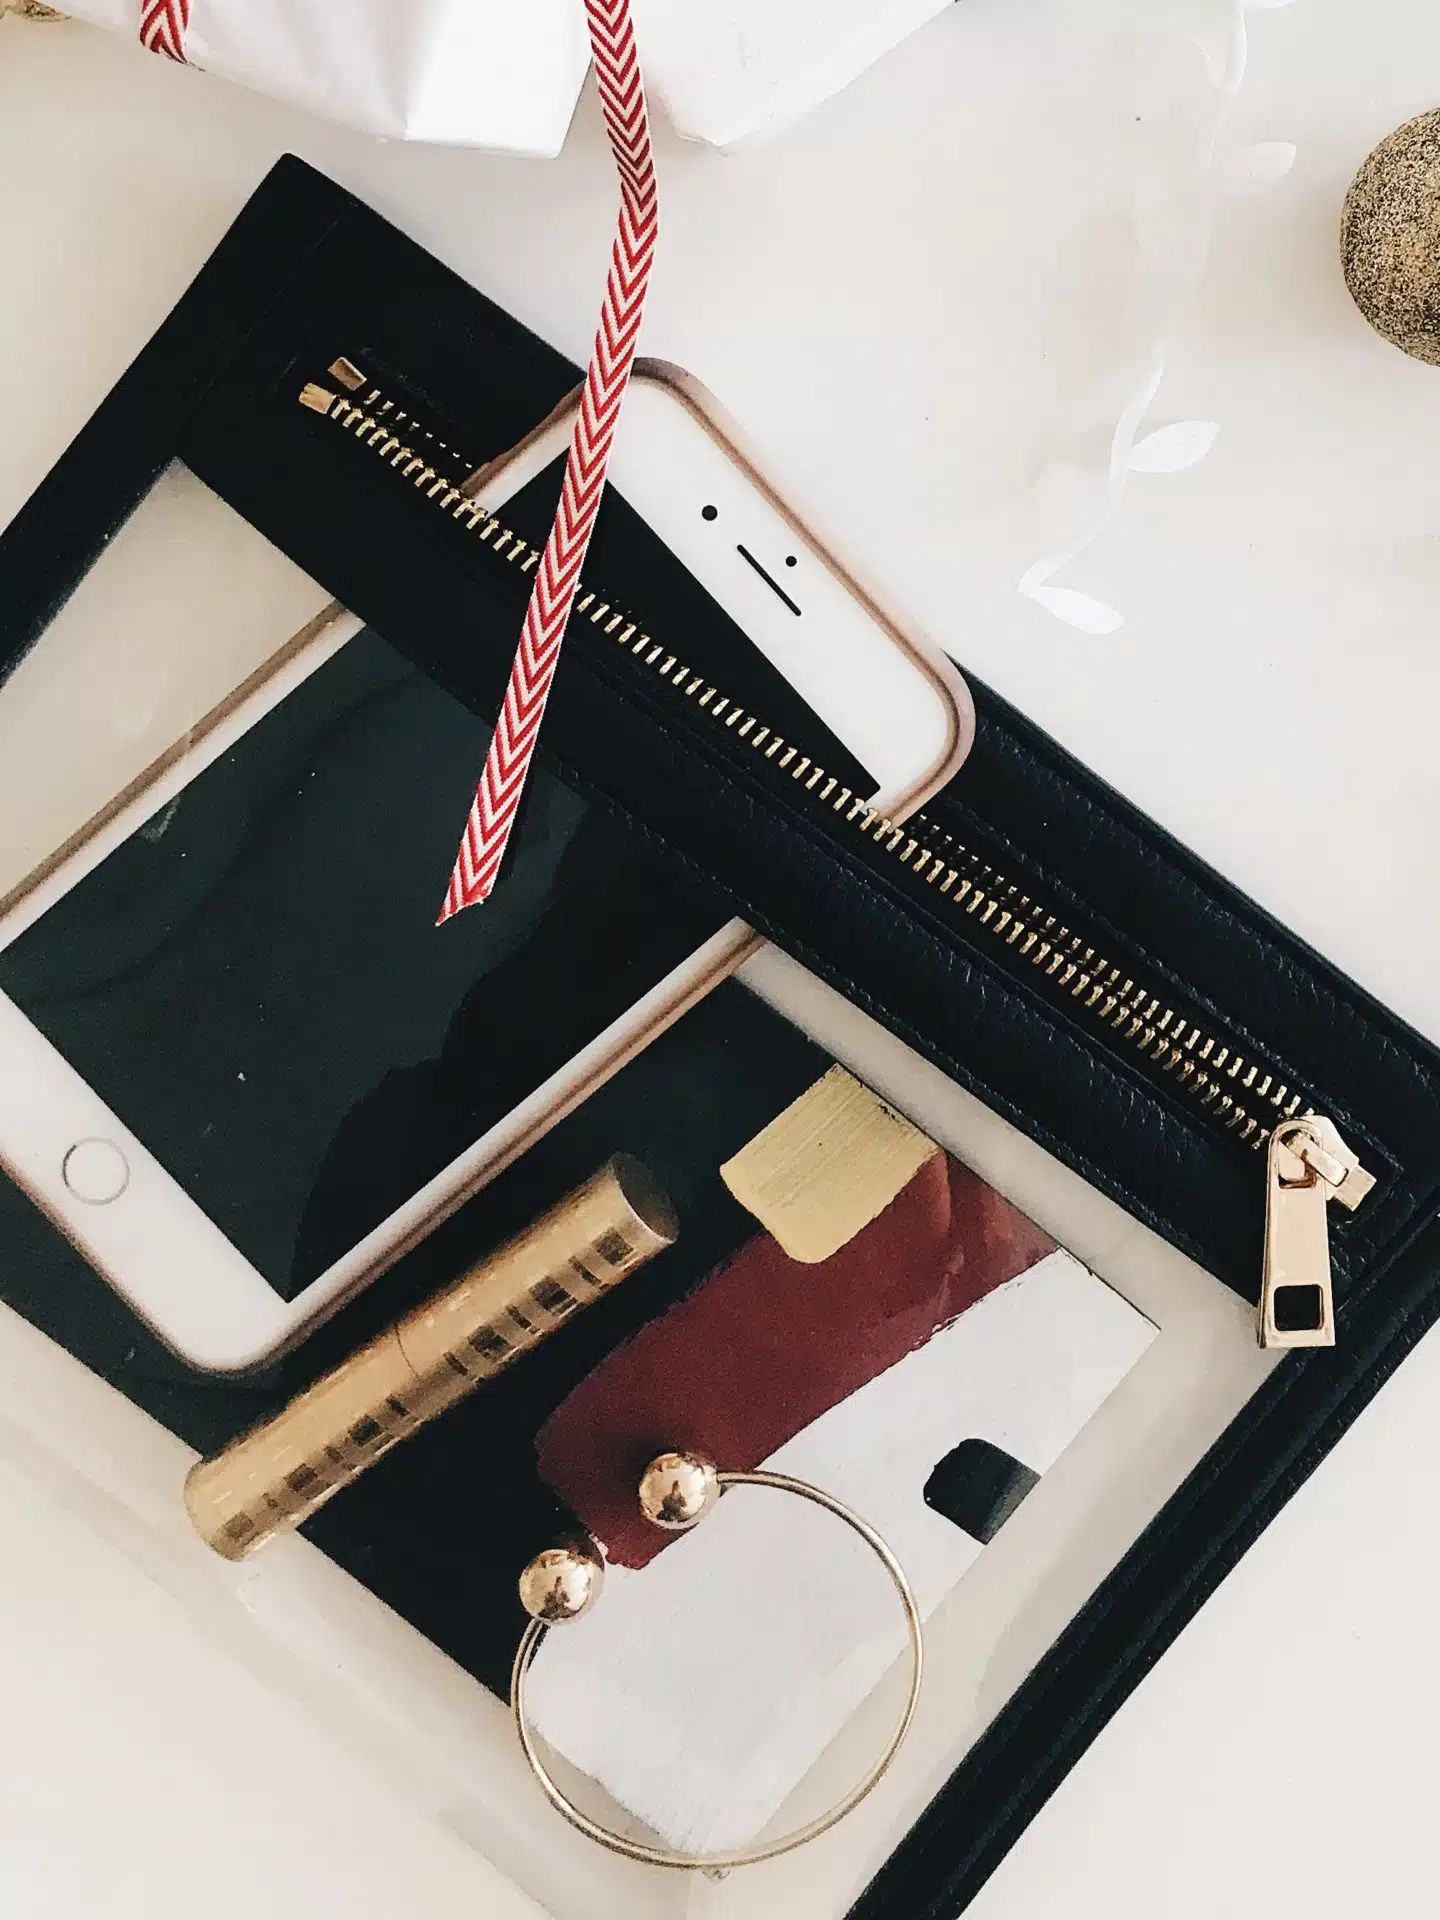 Digital detox challenge to declutter your digital life, by lifestyle blogger What The Fab